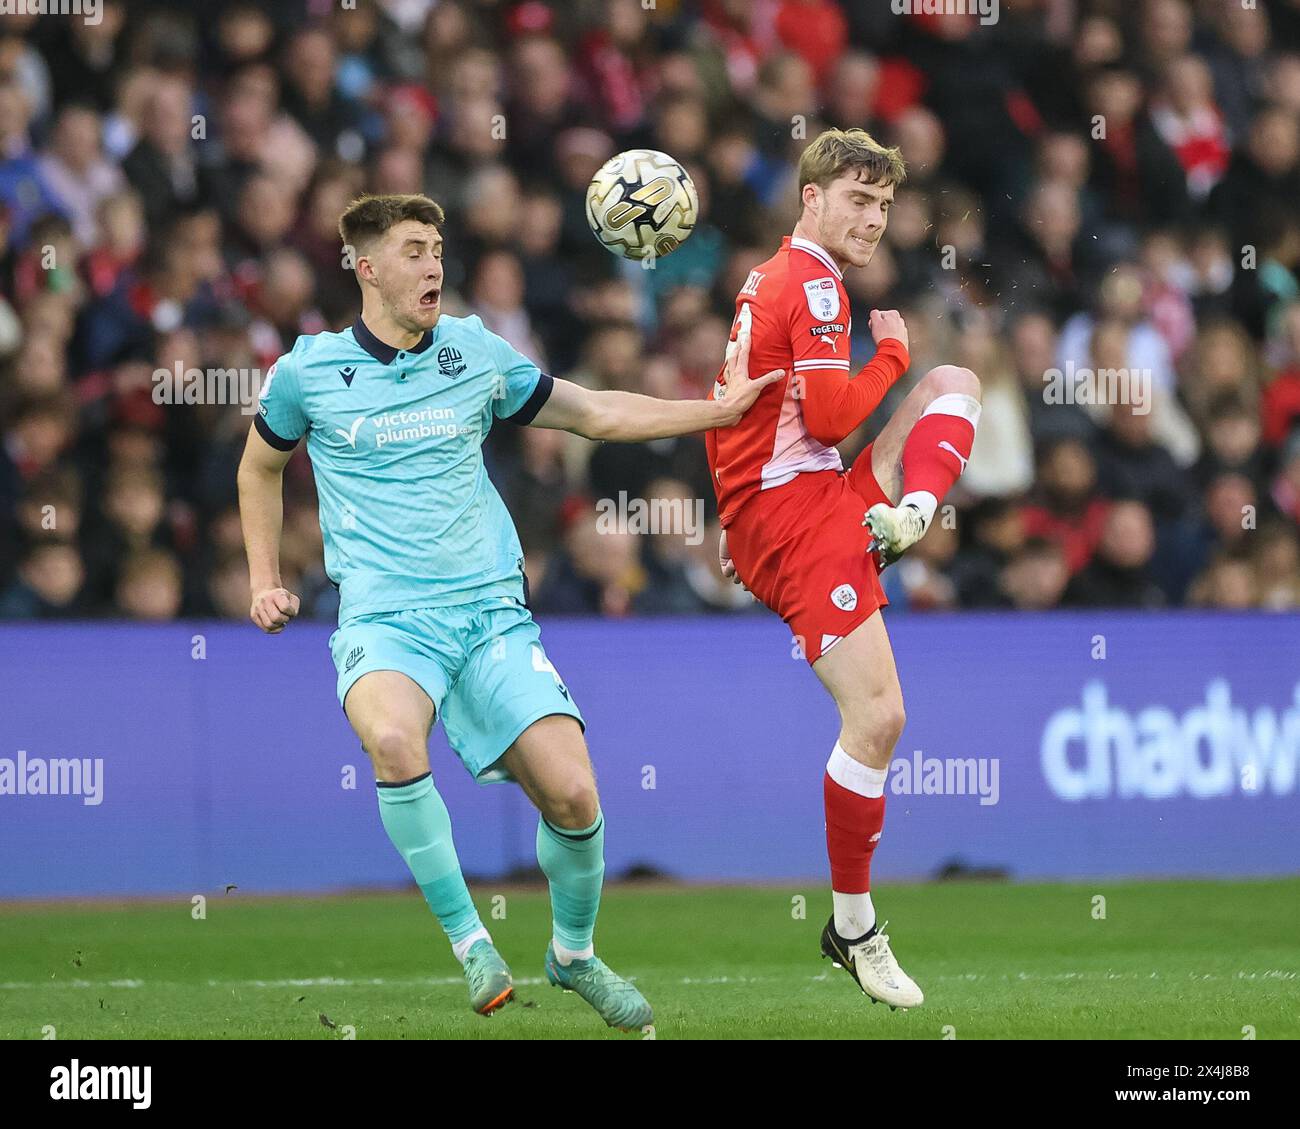 Luca Connell of Barnsley clears the ball up field during the Sky Bet League 1 Promotion Play-offs Semi-final first leg match Barnsley vs Bolton Wanderers at Oakwell, Barnsley, United Kingdom, 3rd May 2024  (Photo by Mark Cosgrove/News Images) Stock Photo